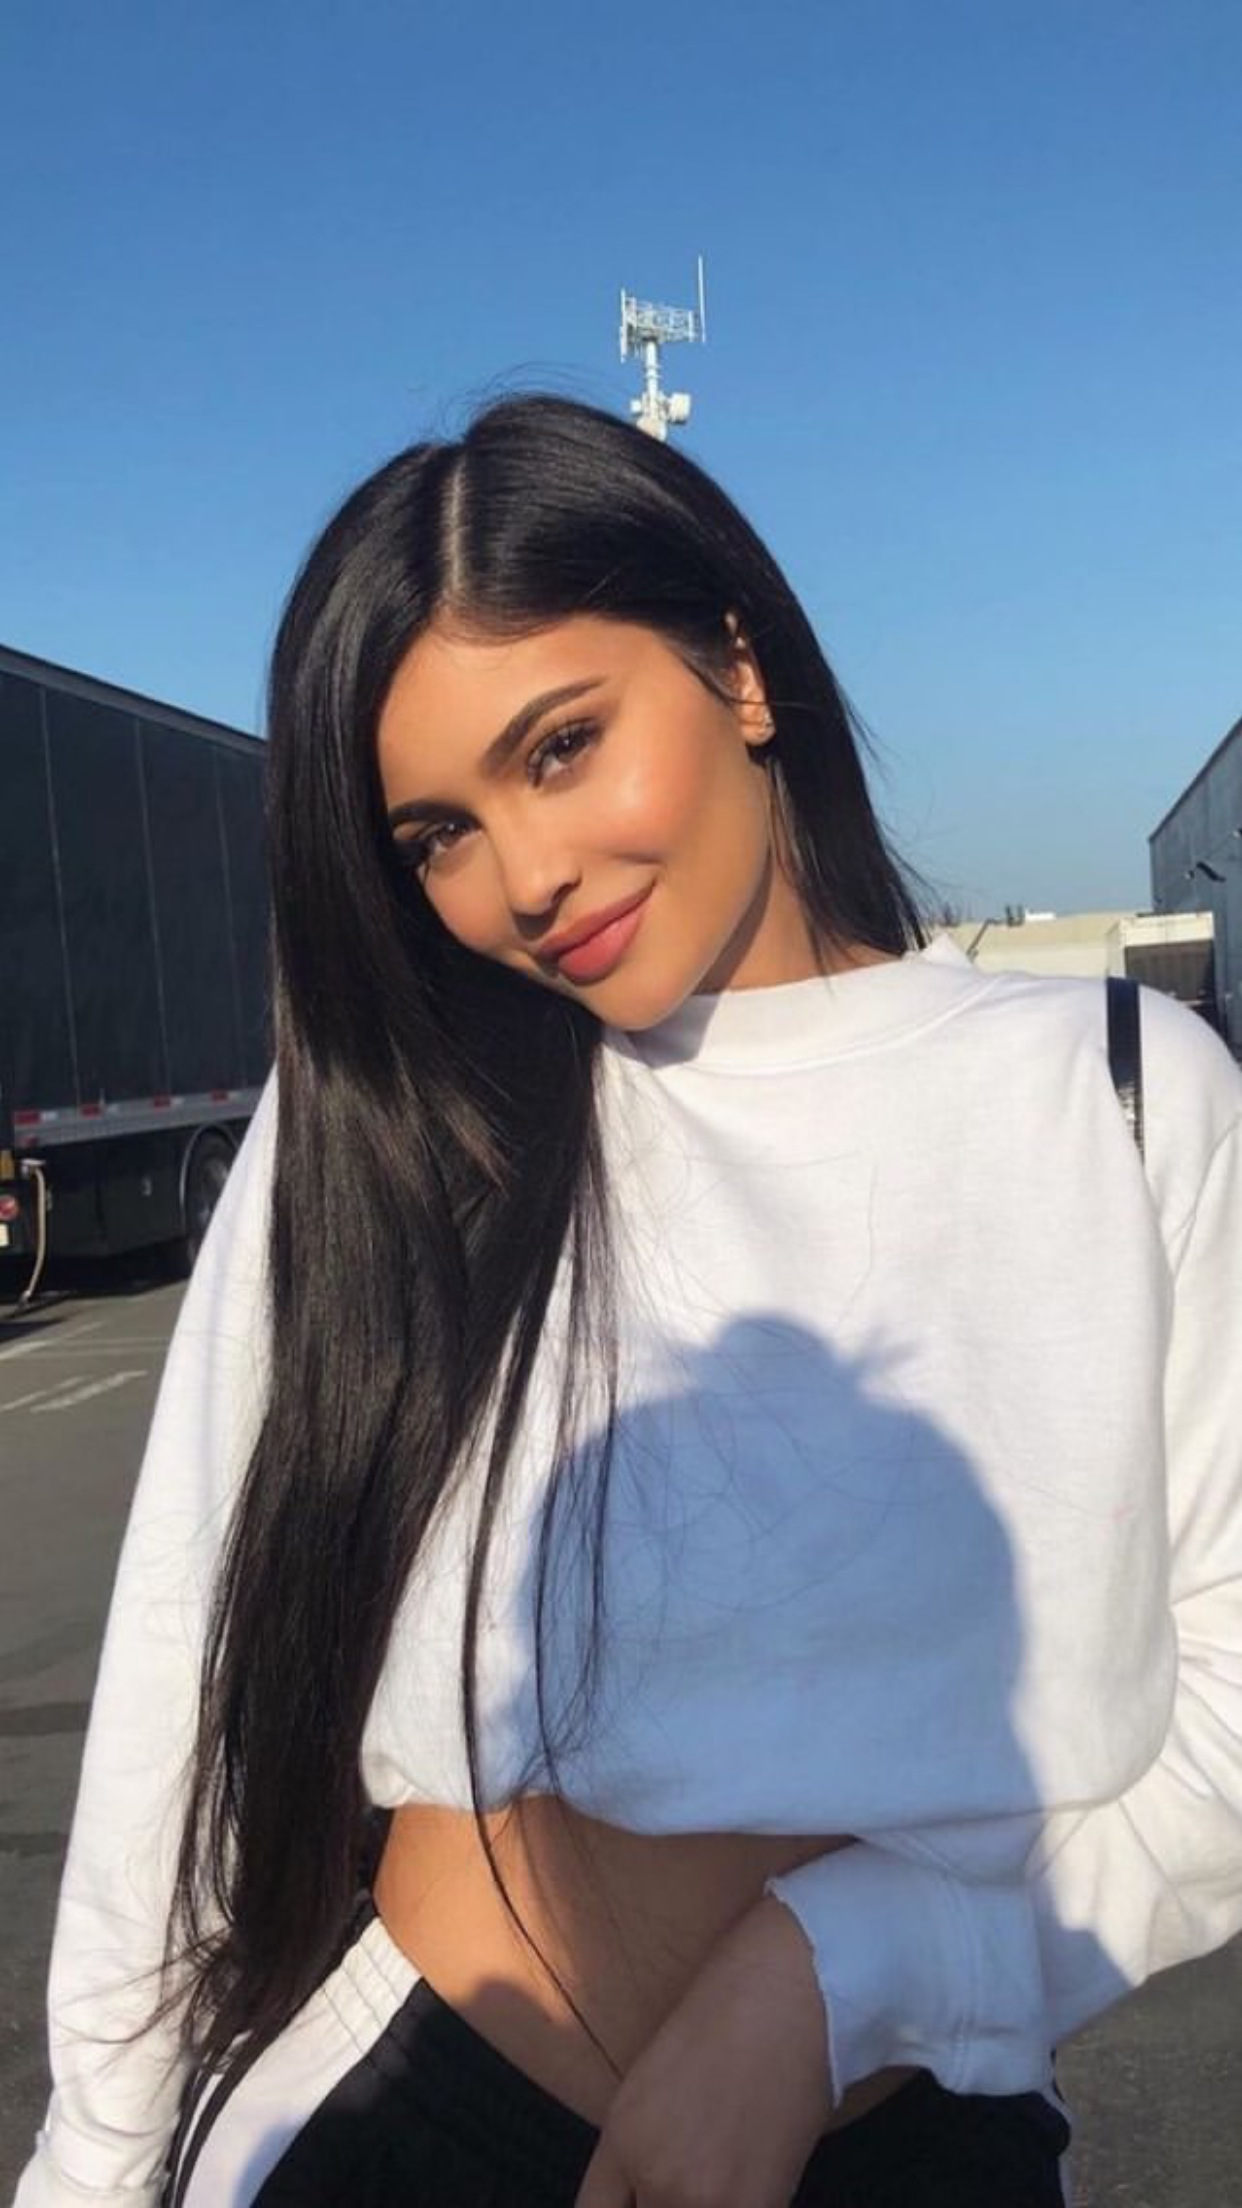 Kylie Jenner Long Hair Wallpapers